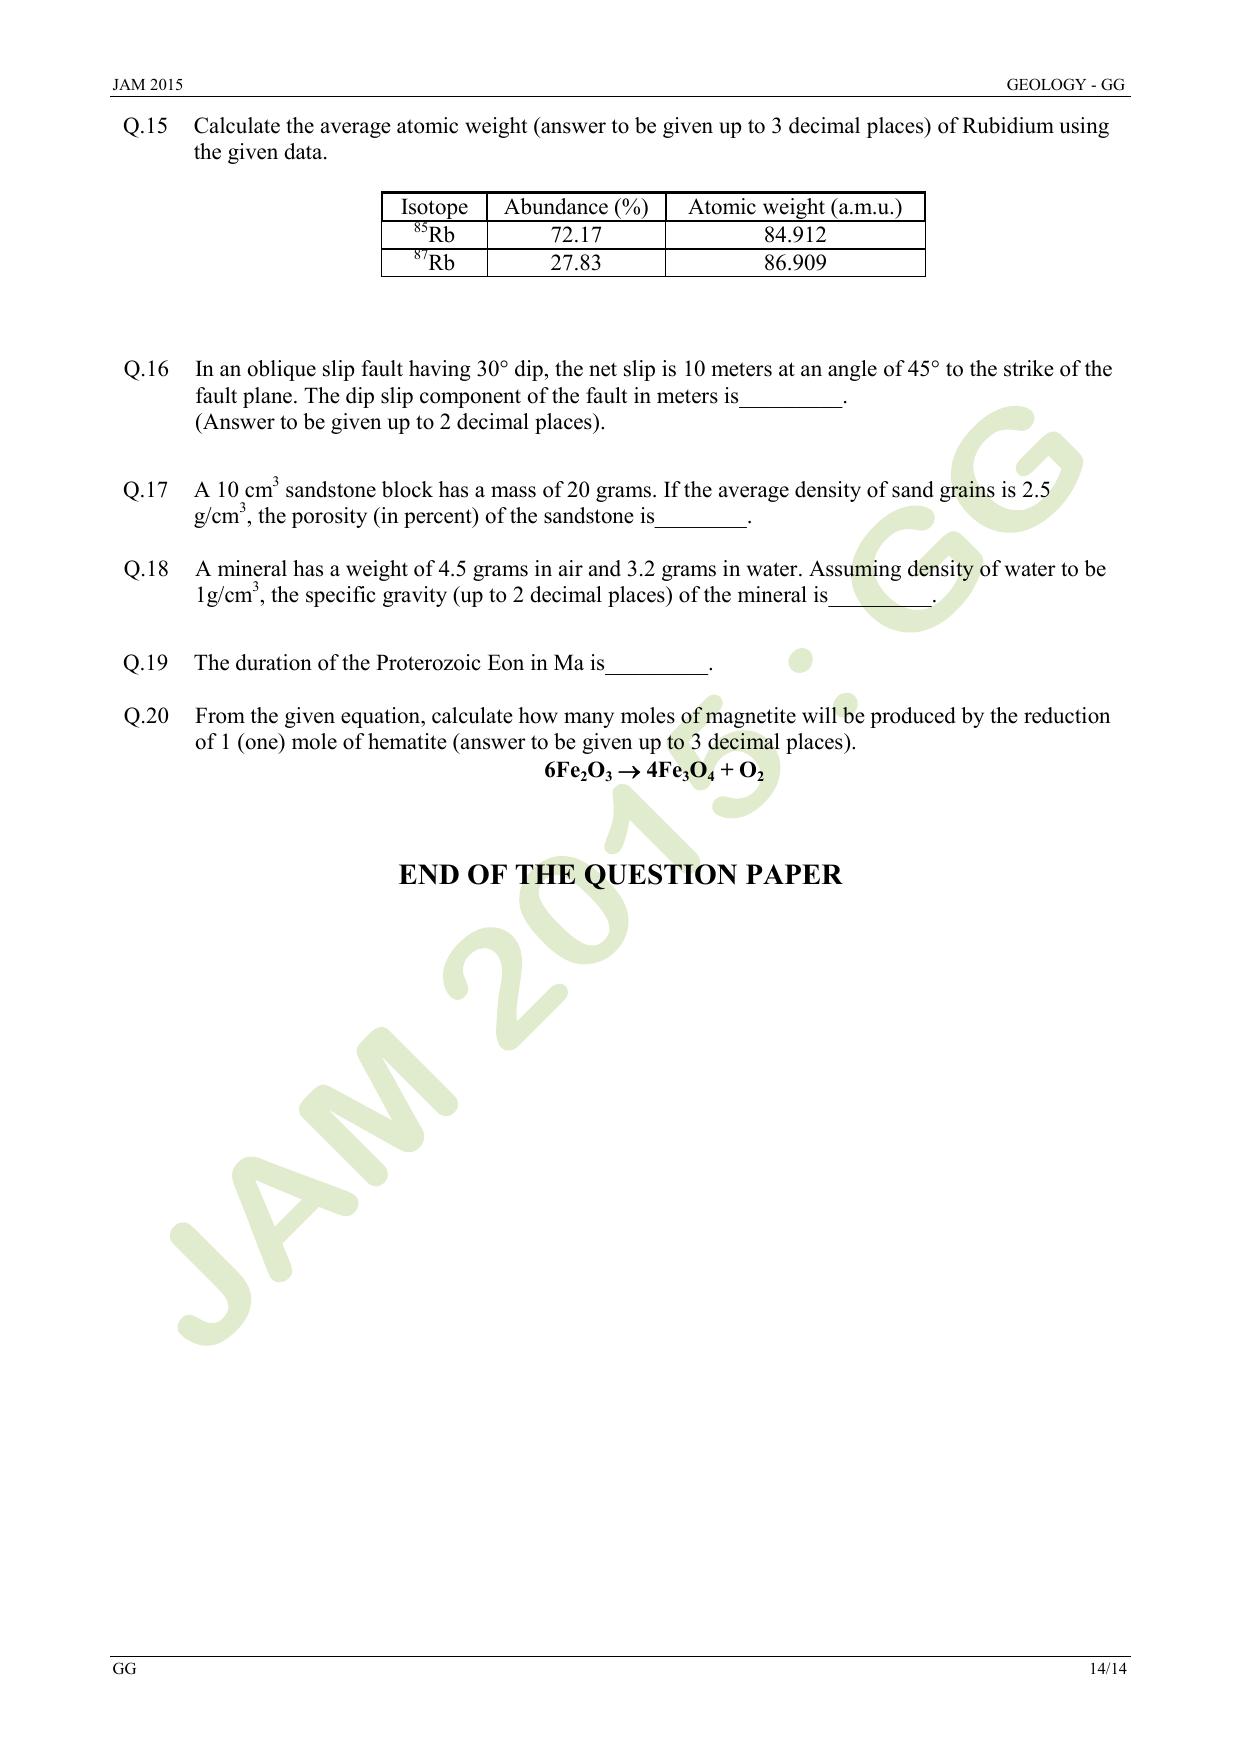 JAM 2015: GG Question Paper - Page 14